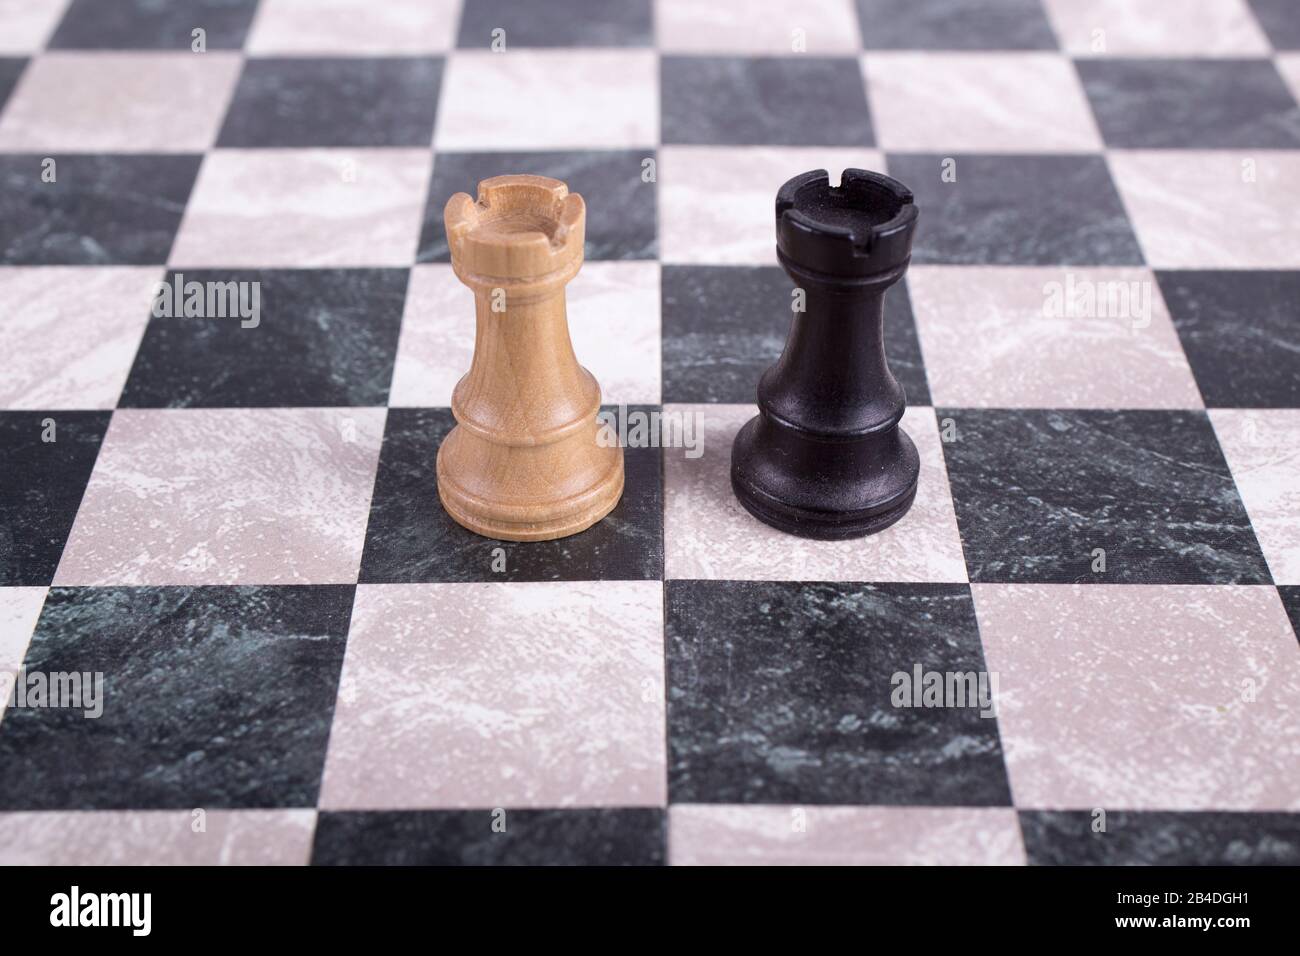 black and white wooden rooks on chessboard Stock Photo